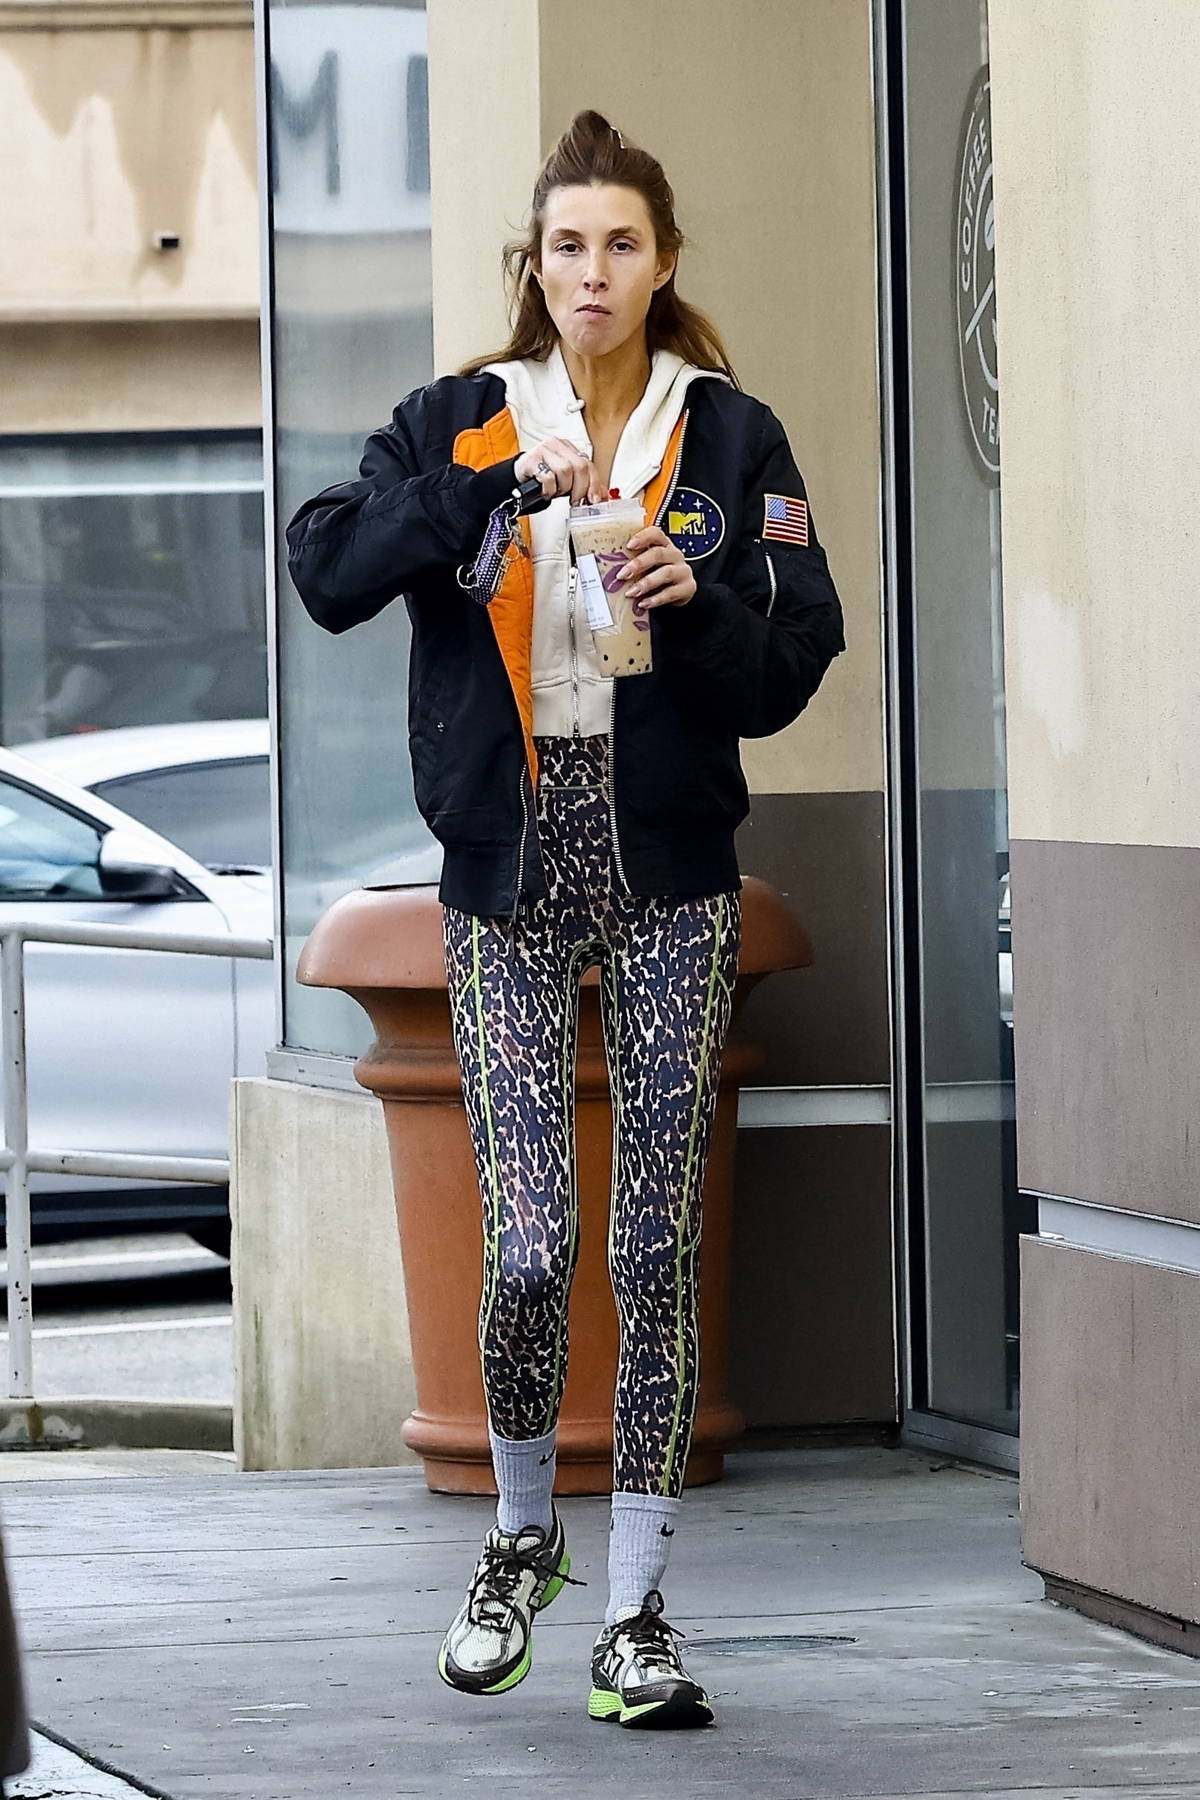 Alessandra Ambrosio rocks a black sweater with purple leggings during a solo  shopping trip to Elysewalker